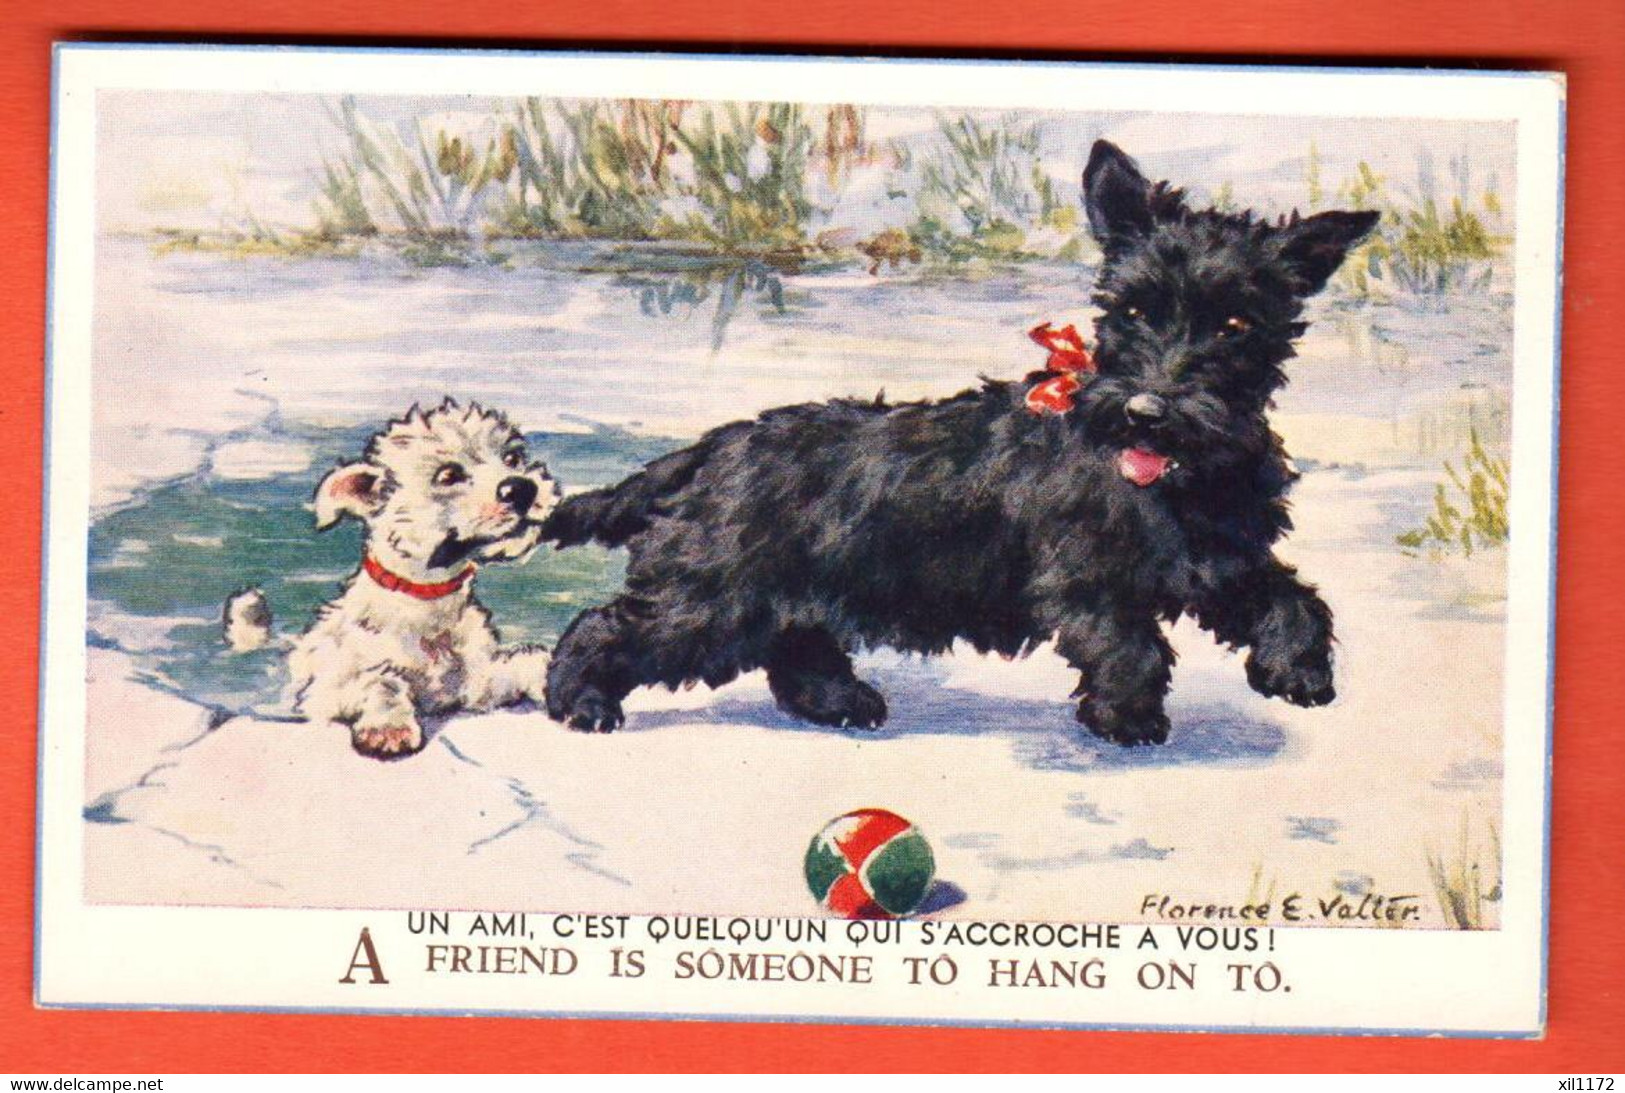 NAGT-18 Illustrator Florence Valter A Friend Is Someone To Hang On To. Dogs Chiens Hunde. Valentine Post Card. Not Used - Valter, Fl. E.